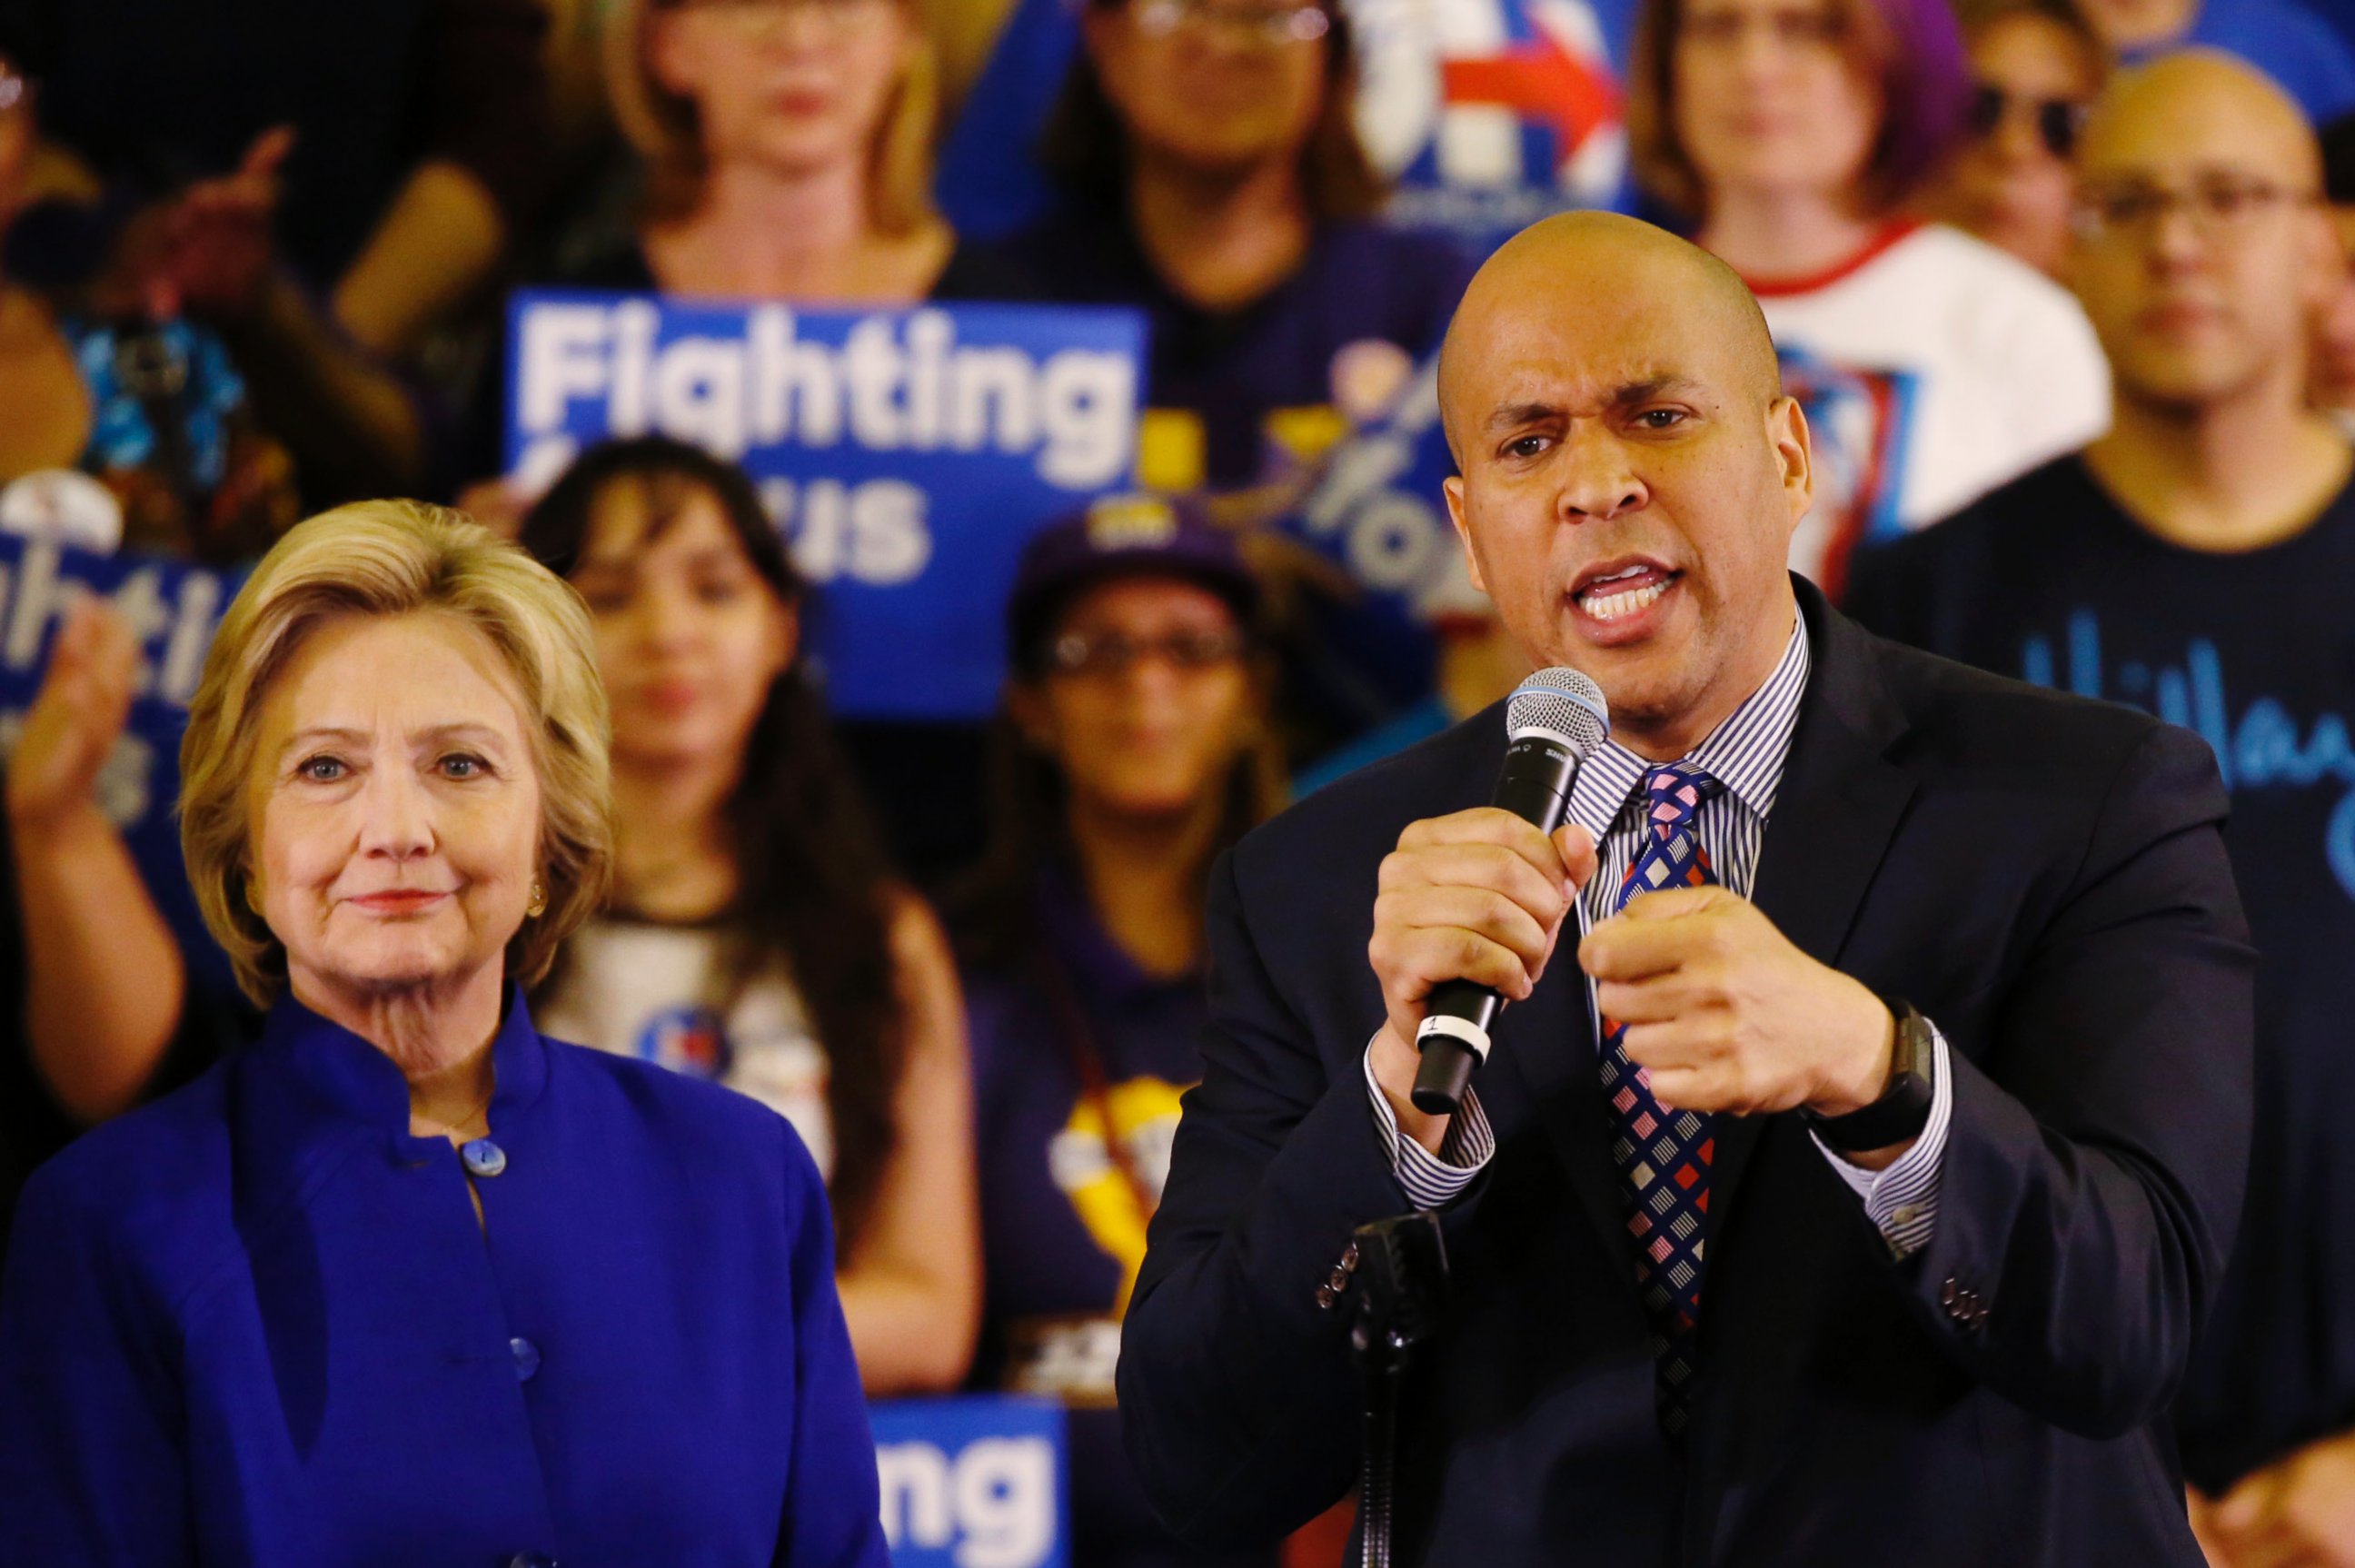 PHOTO: Sen. Cory Booker introduces Hillary Clinton at a campaign rally, June 1, 2016, in Newark, New Jersey.